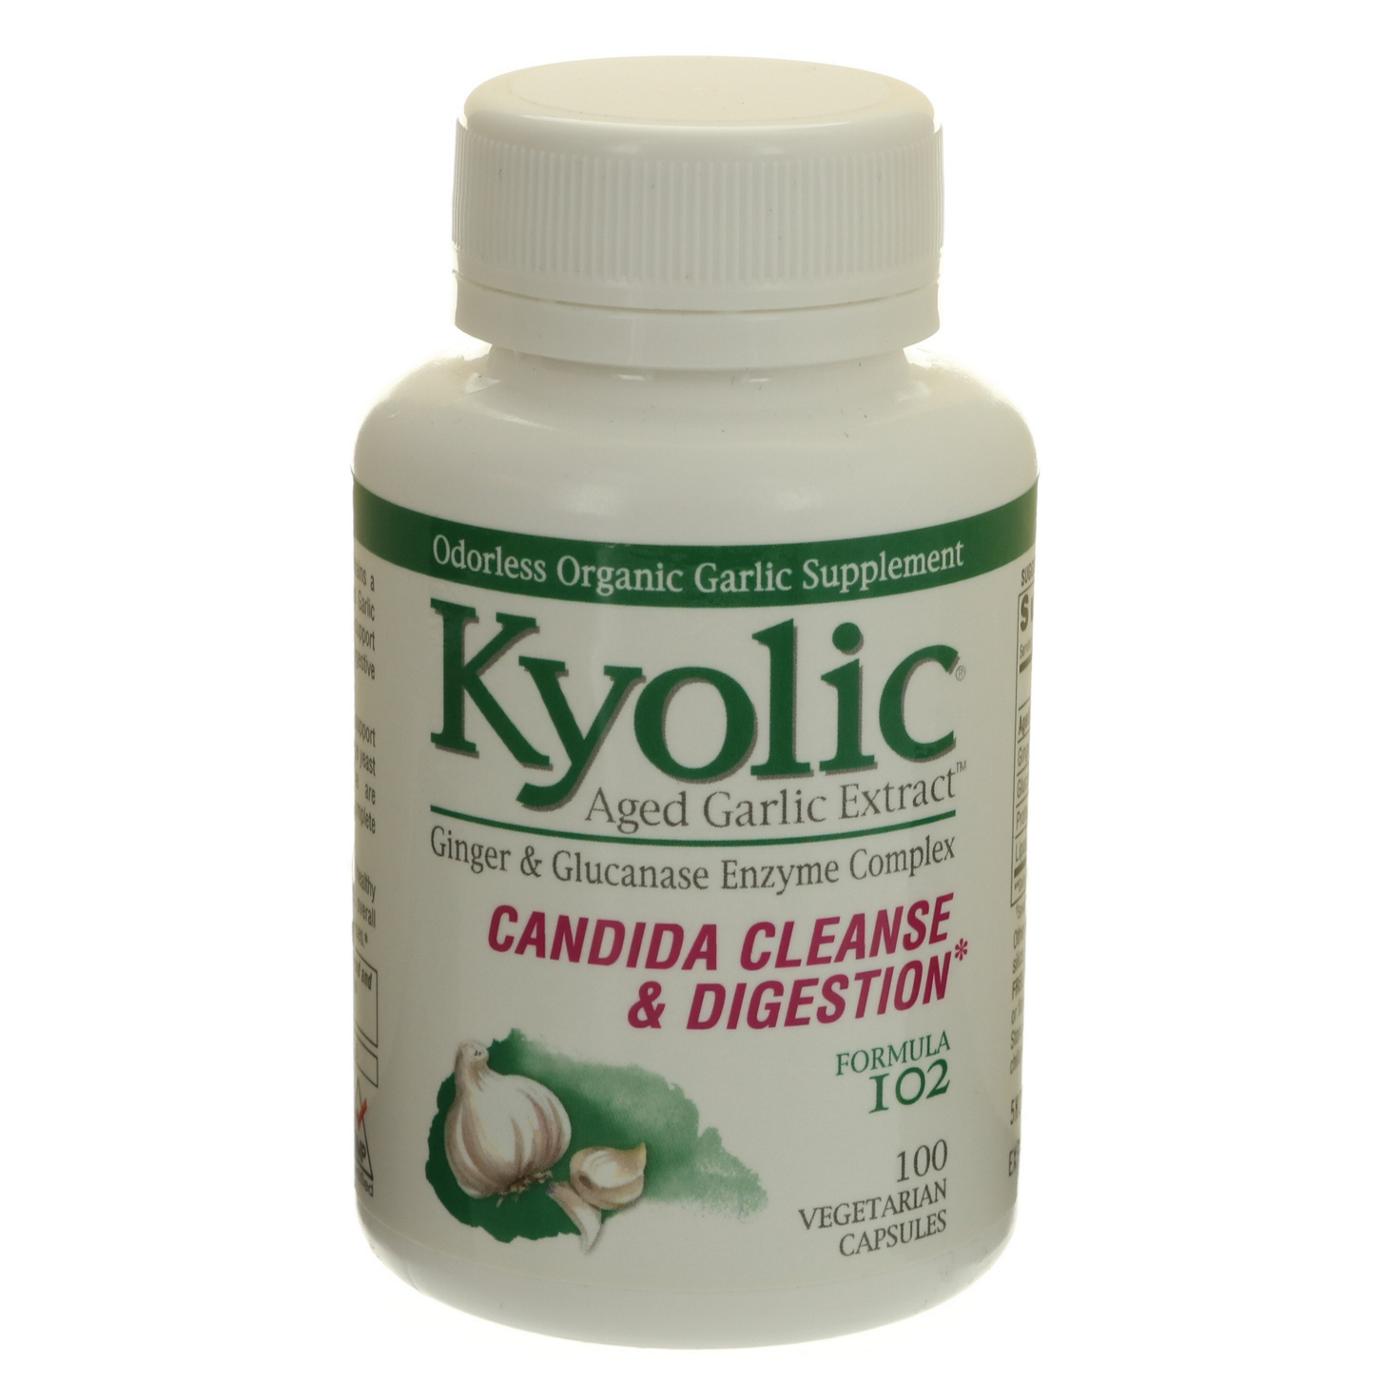 Kyolic Odorless Organic Aged Garlic Extract Candida Cleanse And Digestion Formula 102 Vegetarian Capsules; image 1 of 2